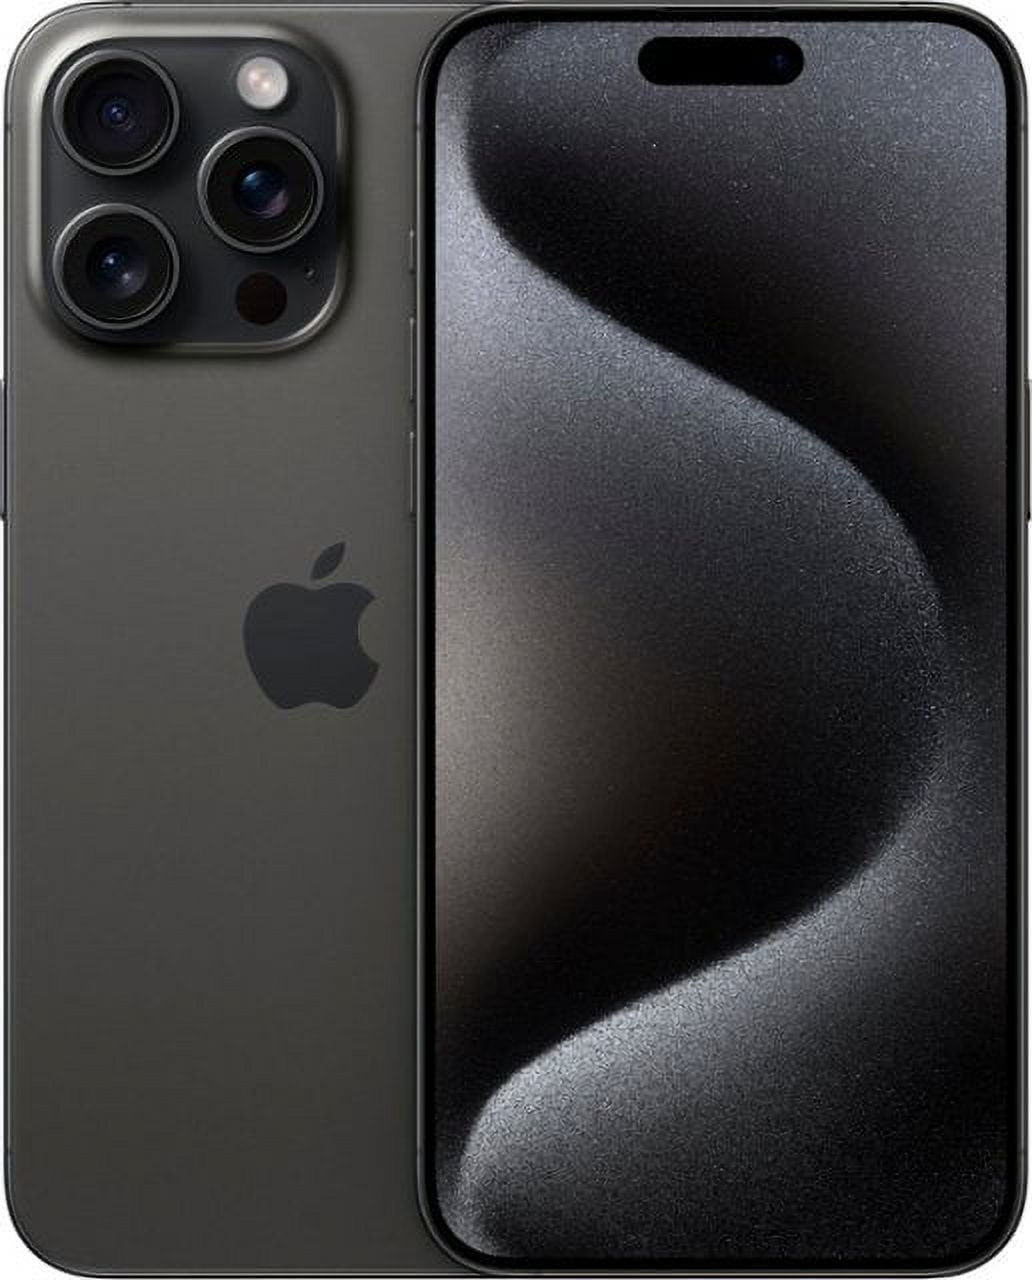  Apple iPhone 11 Pro Max, 64GB, Space Gray - Unlocked (Renewed)  : Cell Phones & Accessories